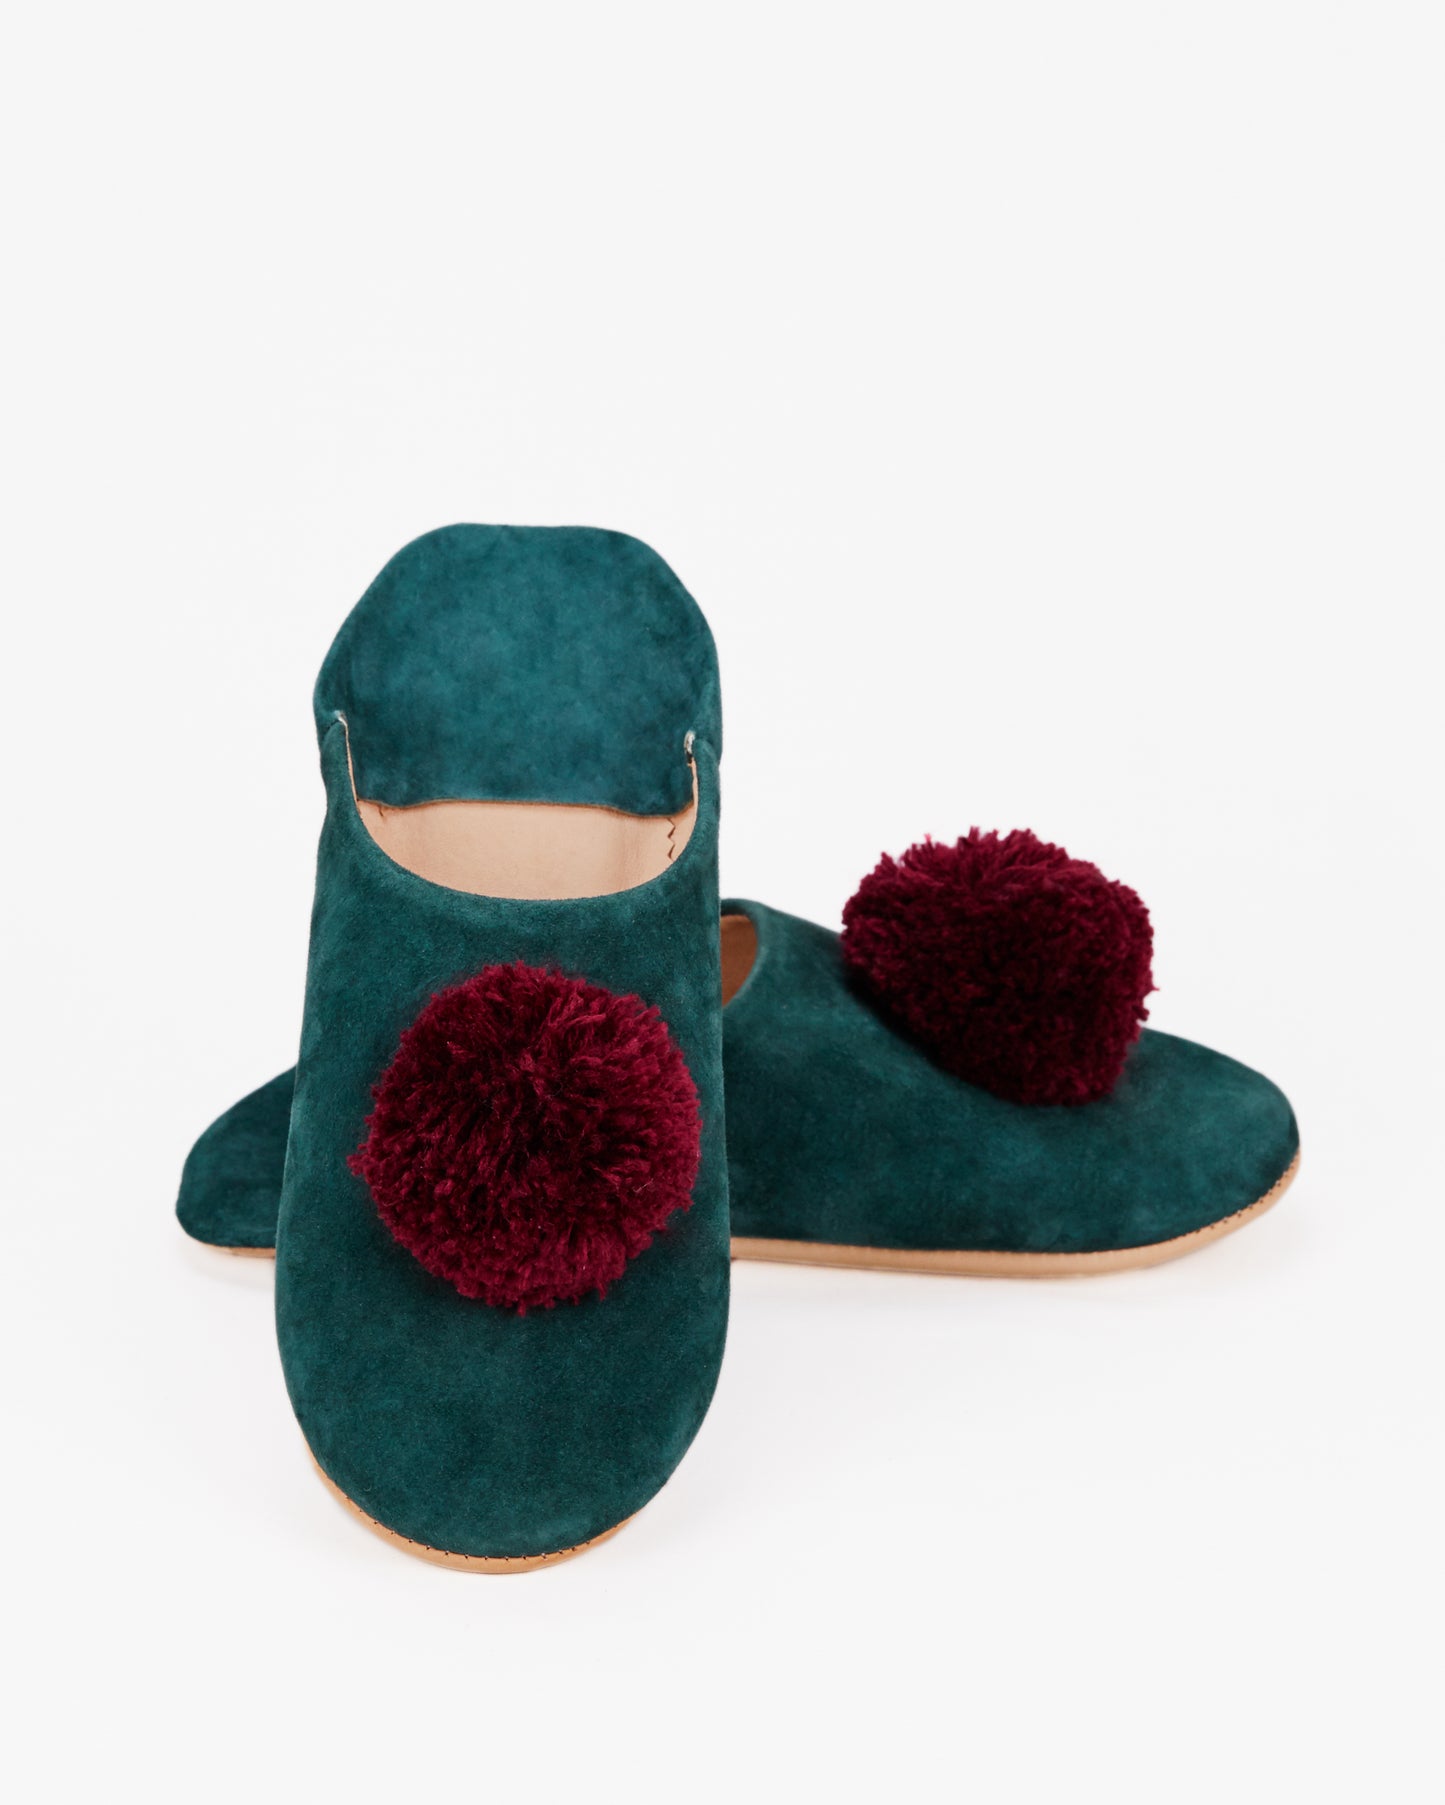 Moroccan Slippers, Teal/Red Pom Poms